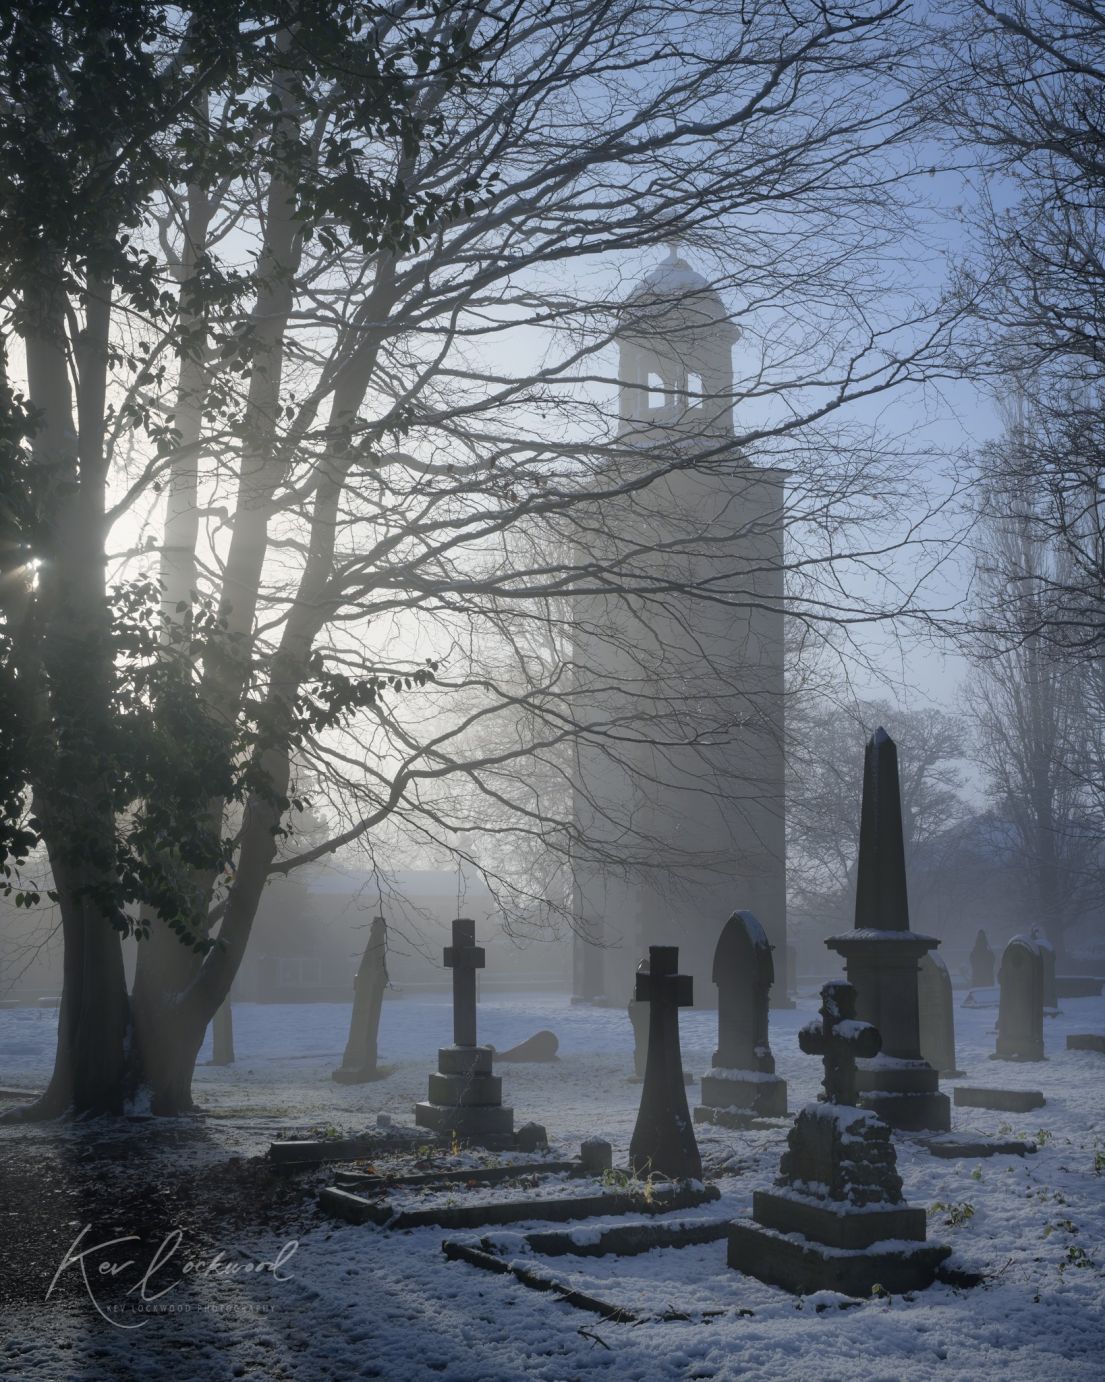 A tall silhouette of a church tower in a grave yard, surrounded by bare trees and gravestones on a frosty morning.